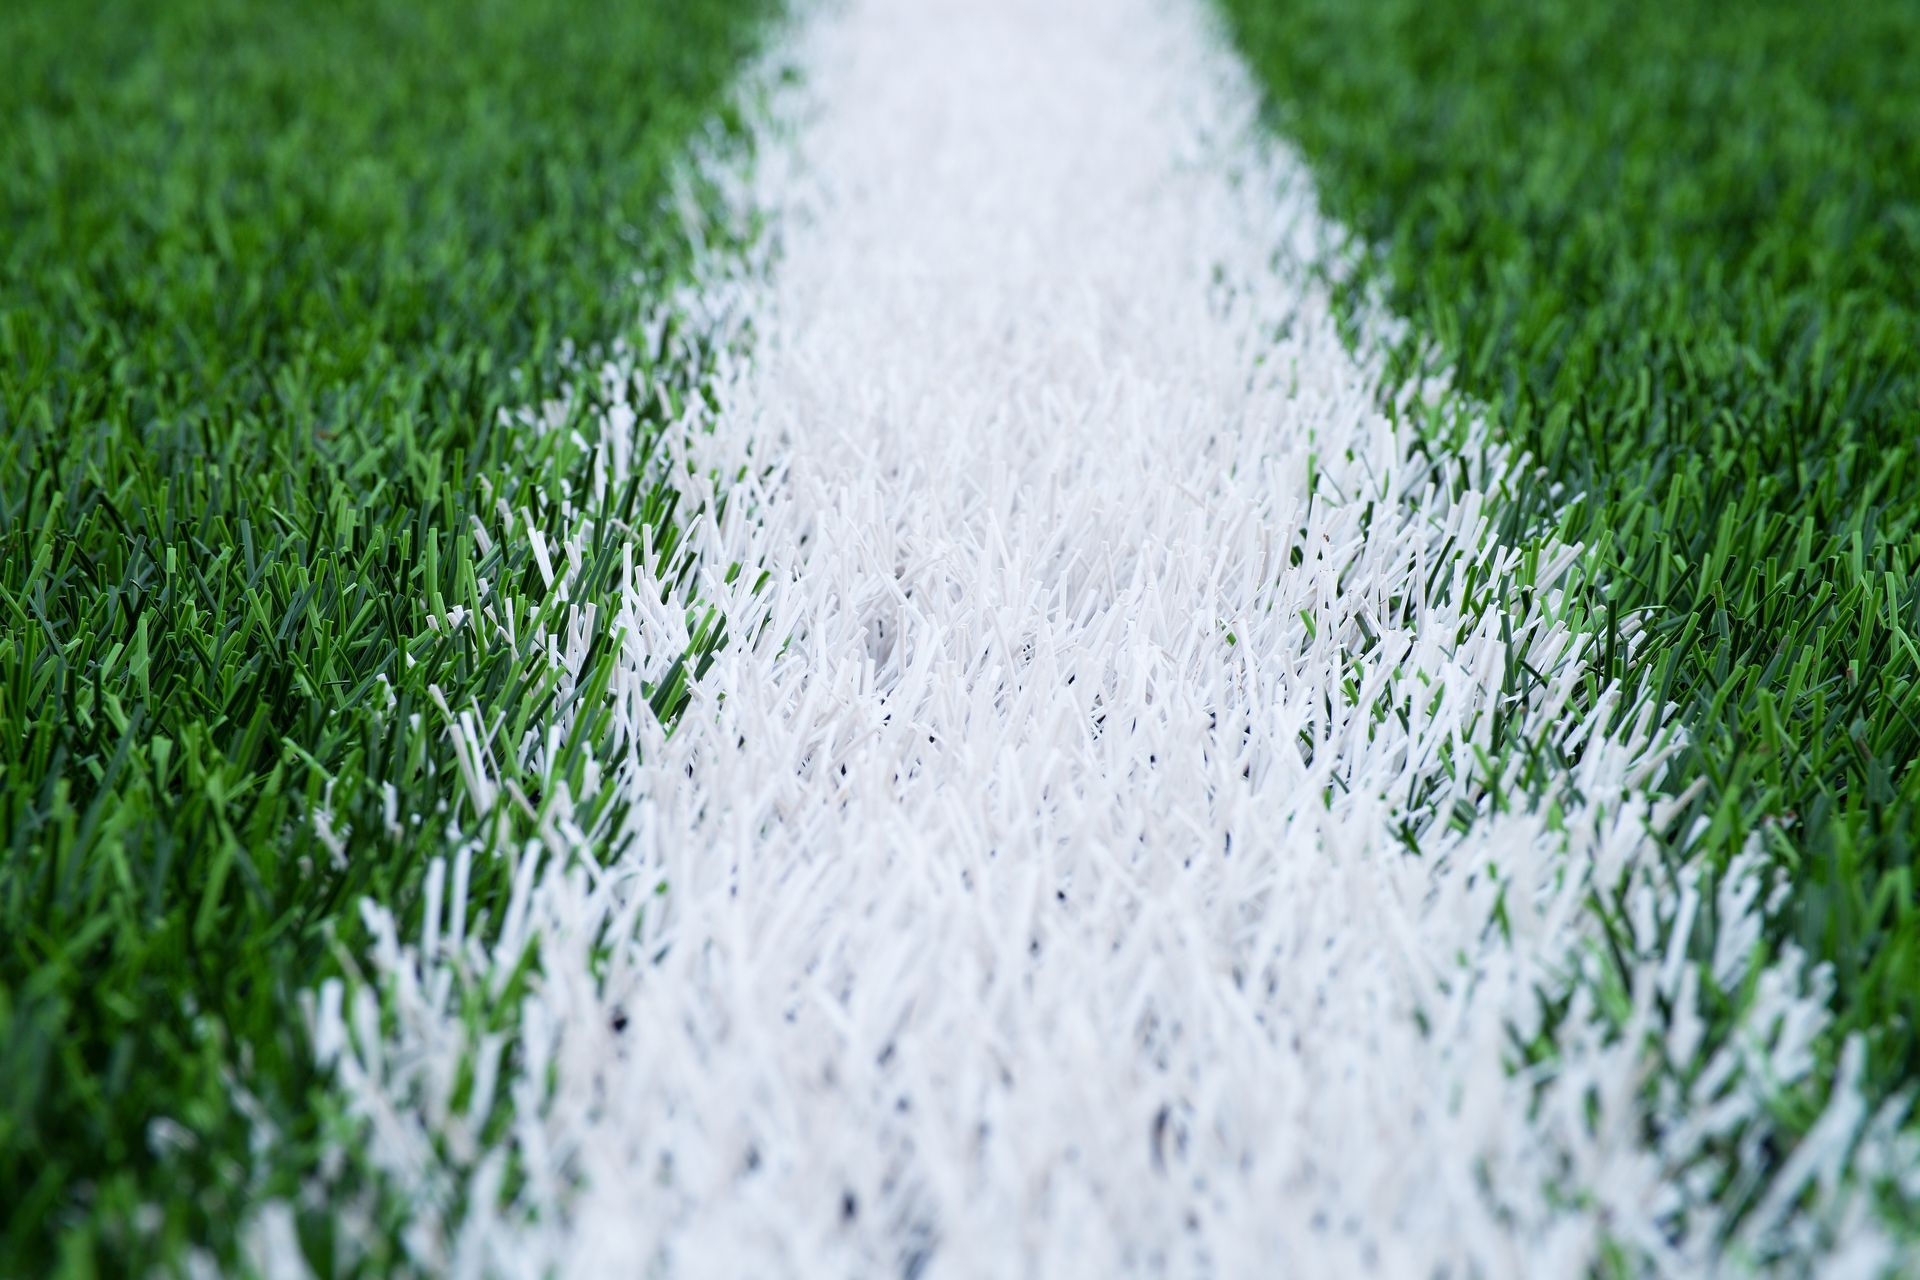 a close up of a white line on a soccer field .